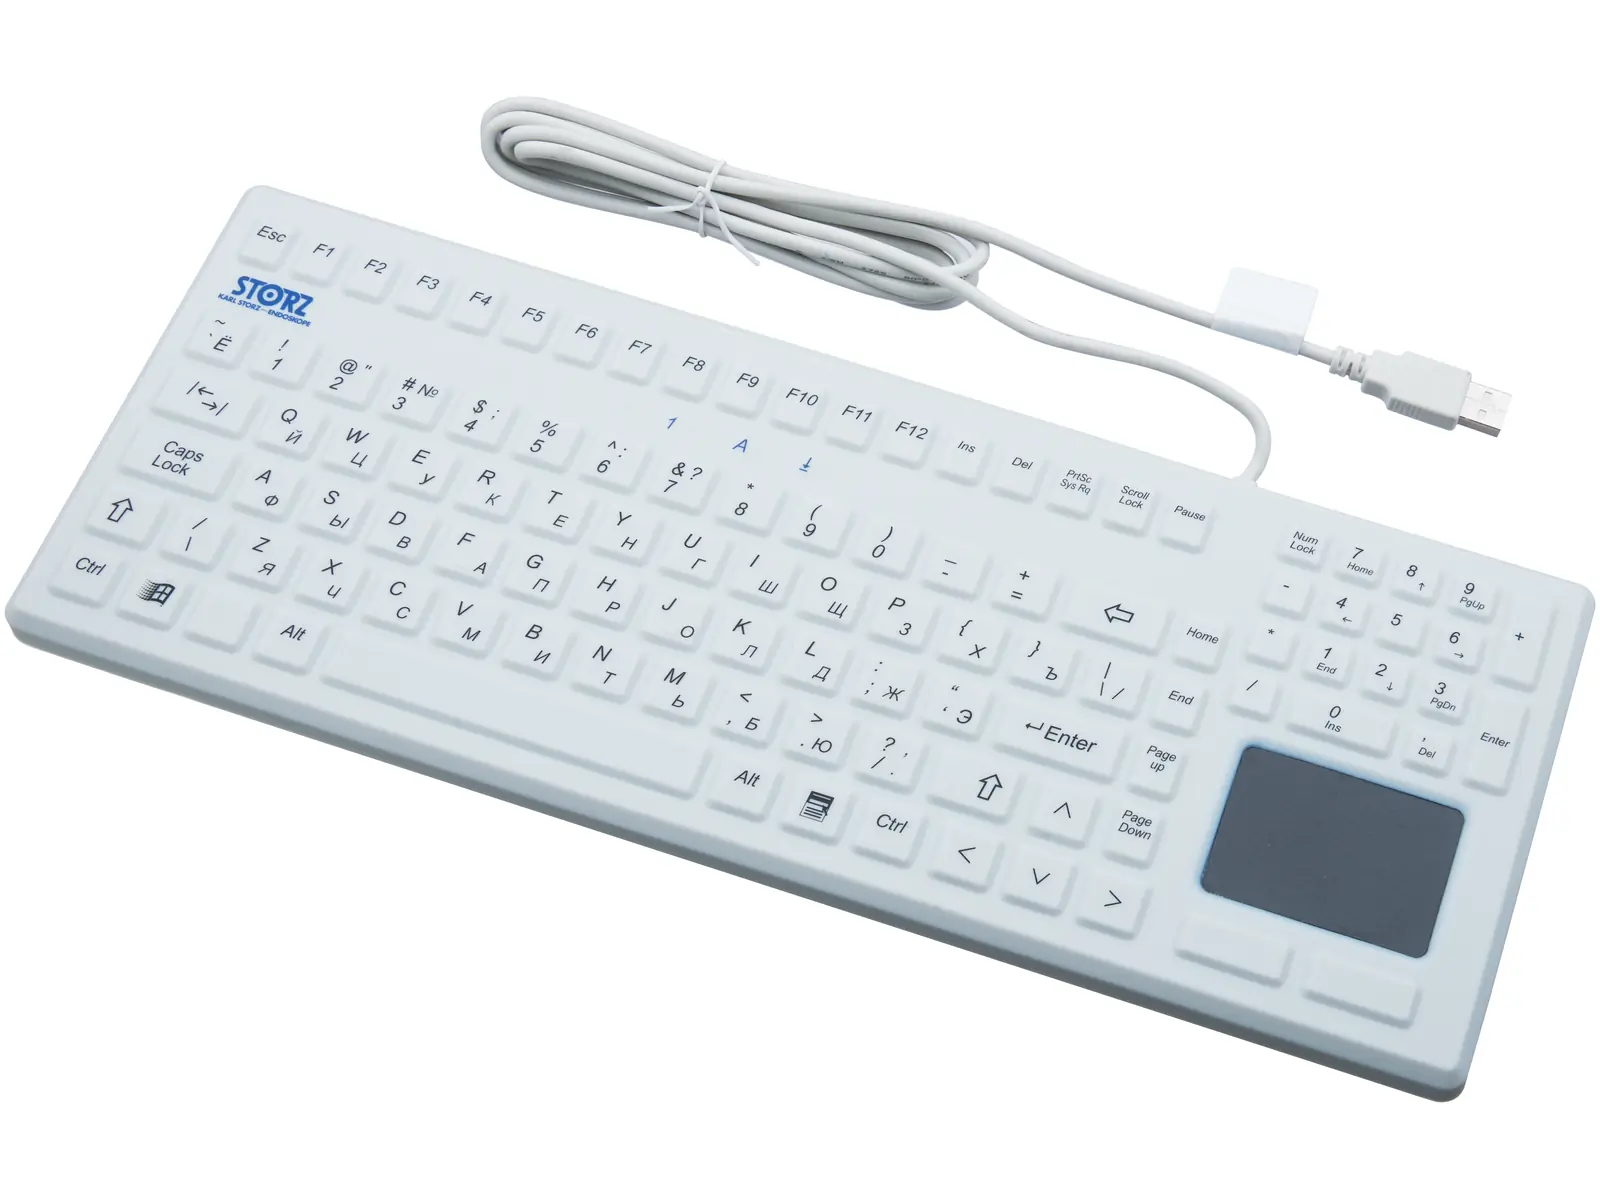 USB silicone keyboard with touchpad, RU | KARL STORZ Endoskope 